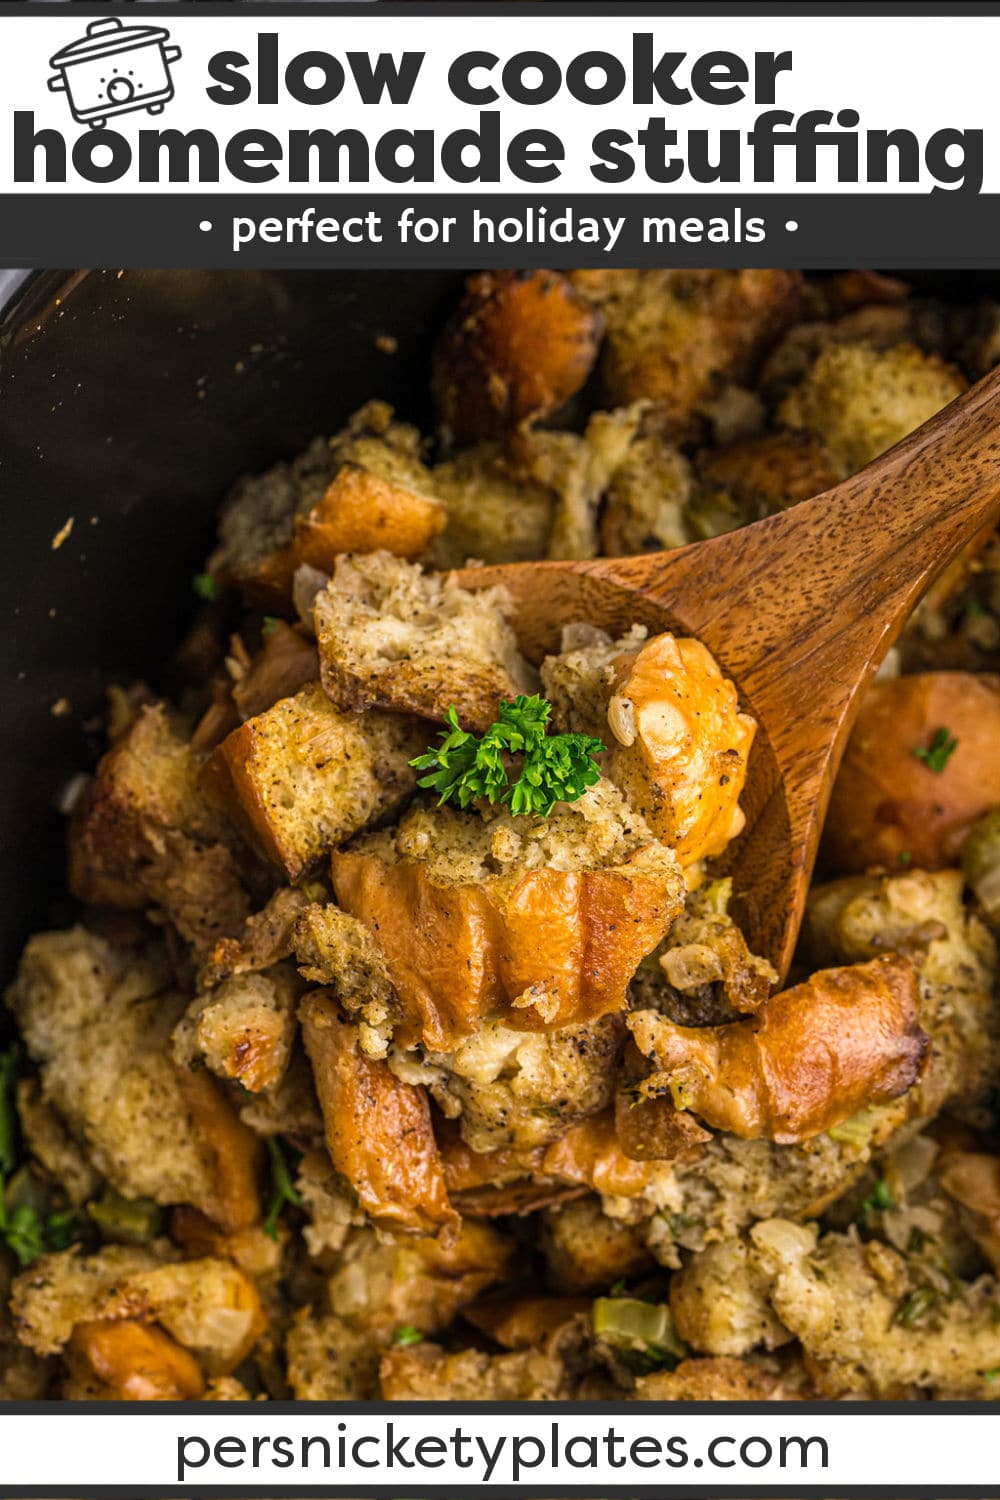 Slow Cooker Stuffing is so easy to make and is full of flavorful herbs. This crockpot side dish will save oven space and be a hit alongside your turkey. | www.persnicketyplates.com